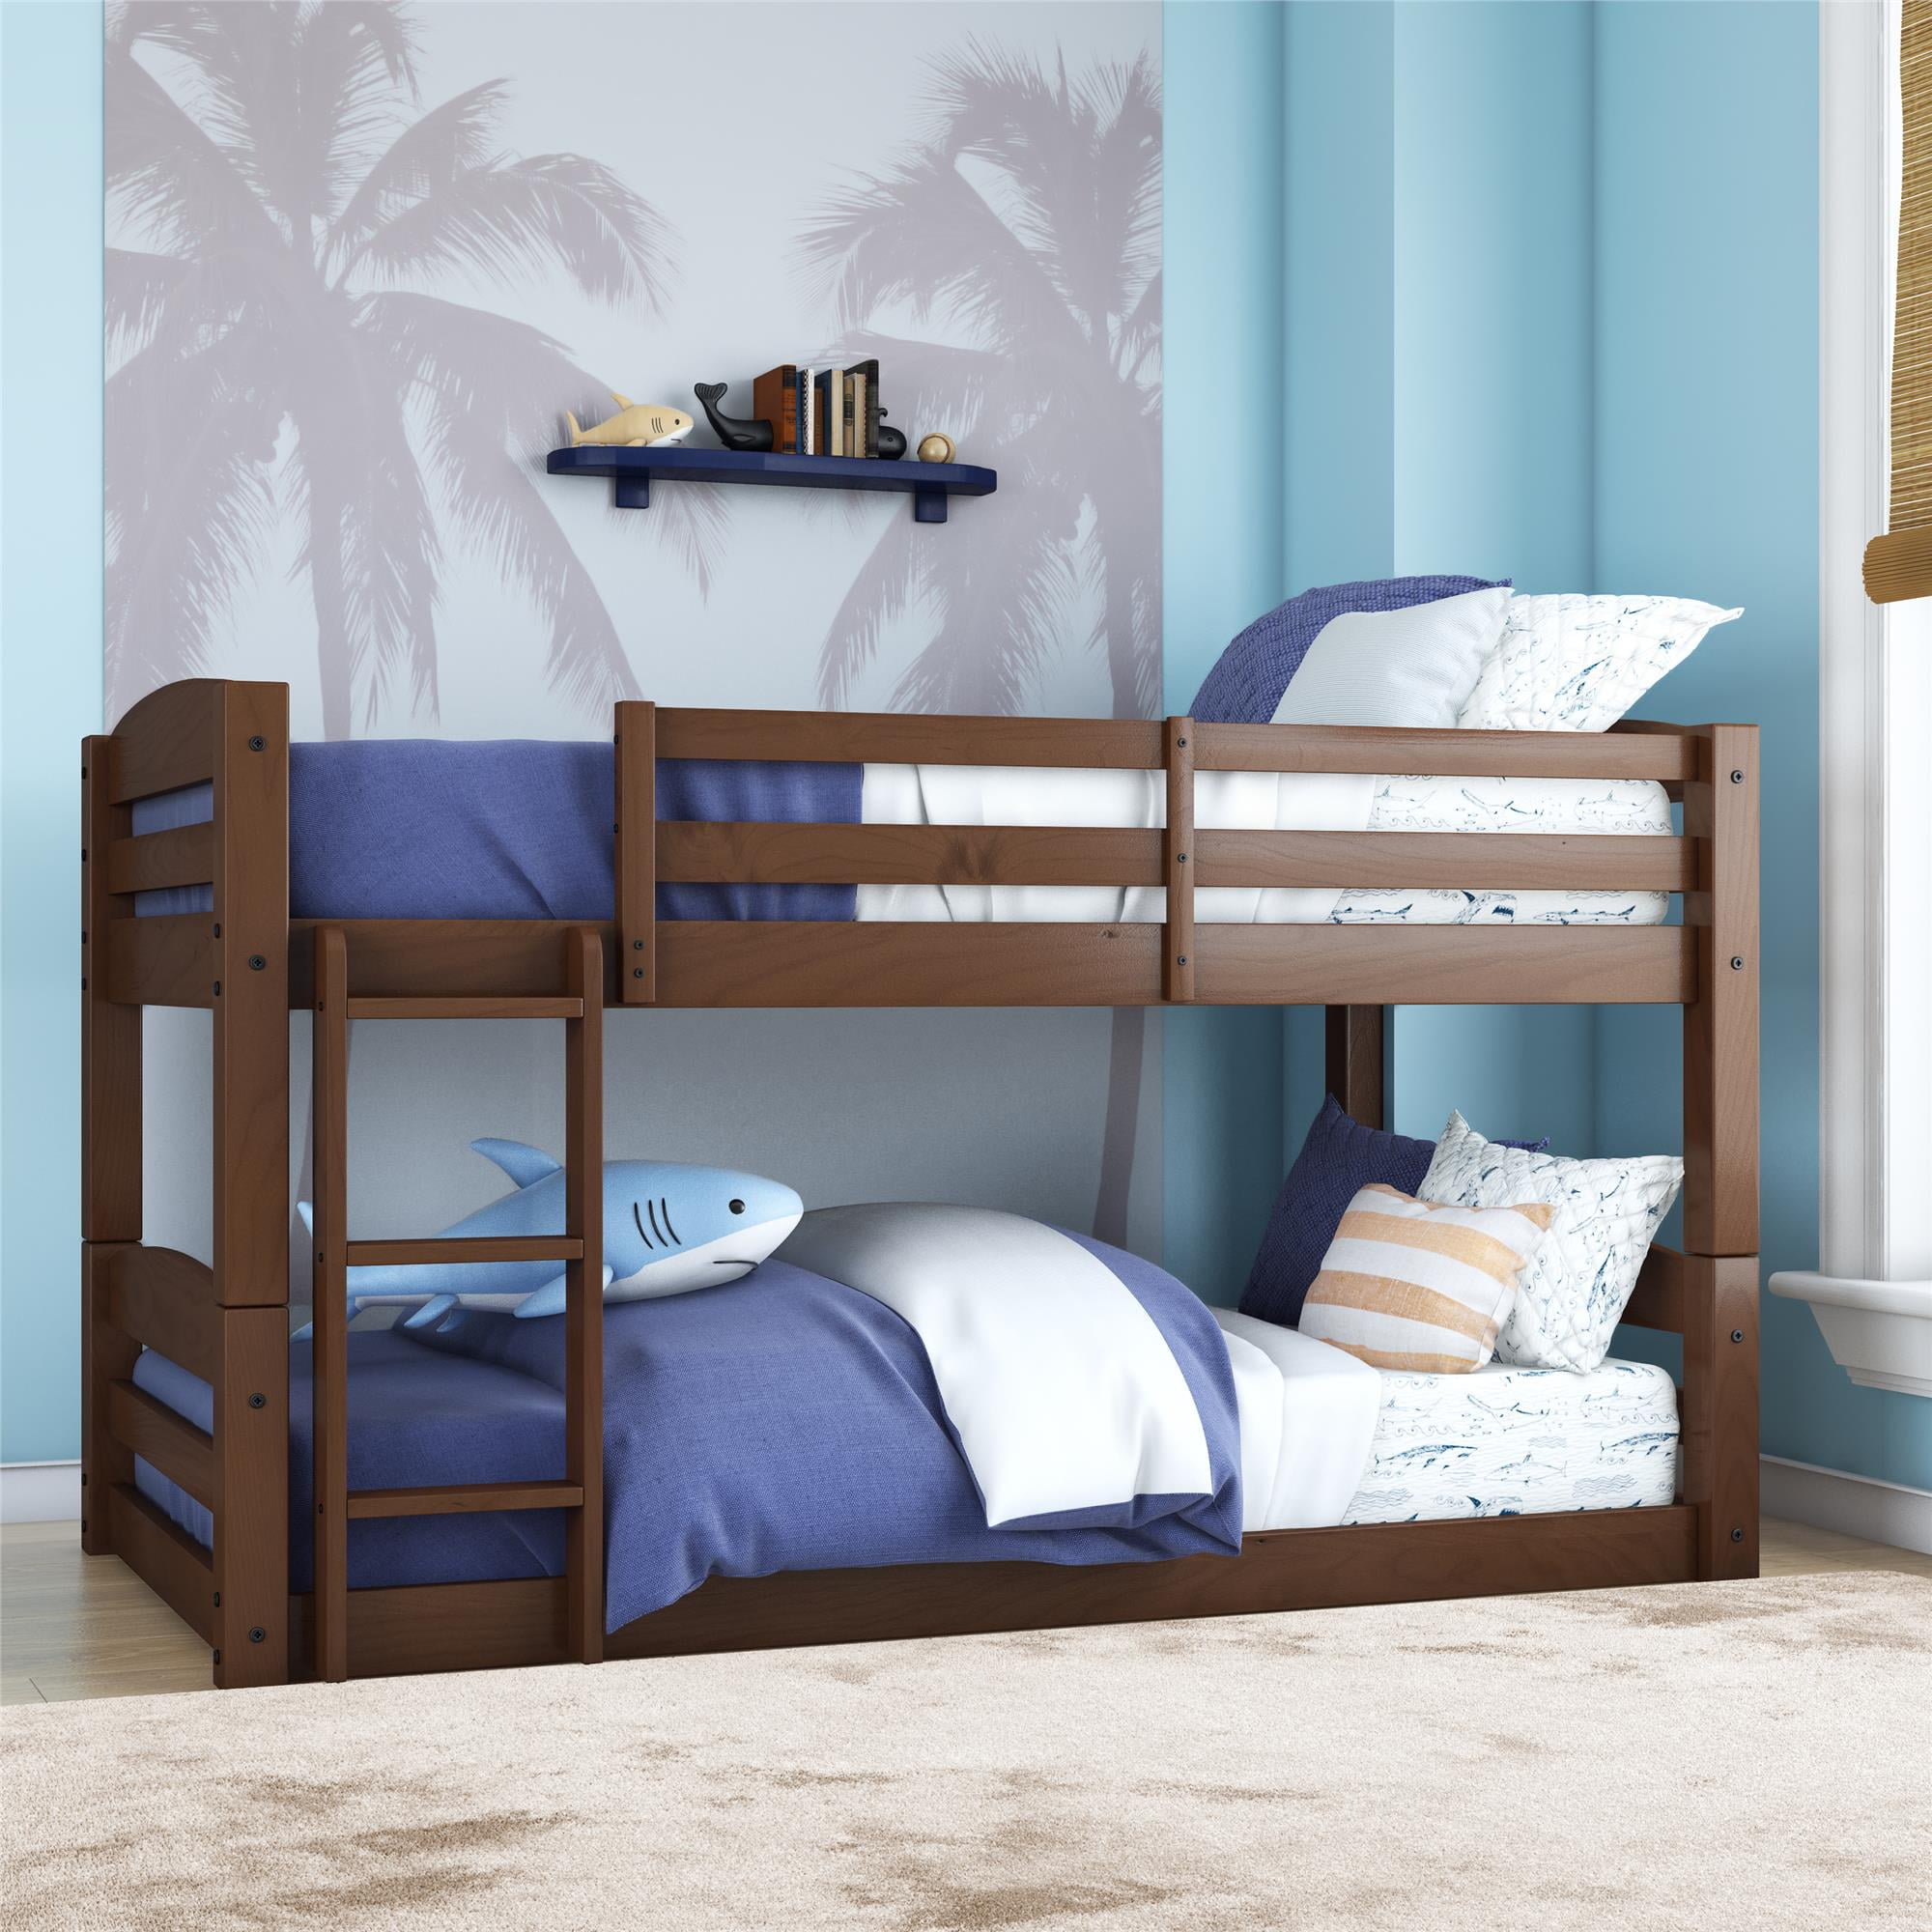 better homes and gardens bunk bed